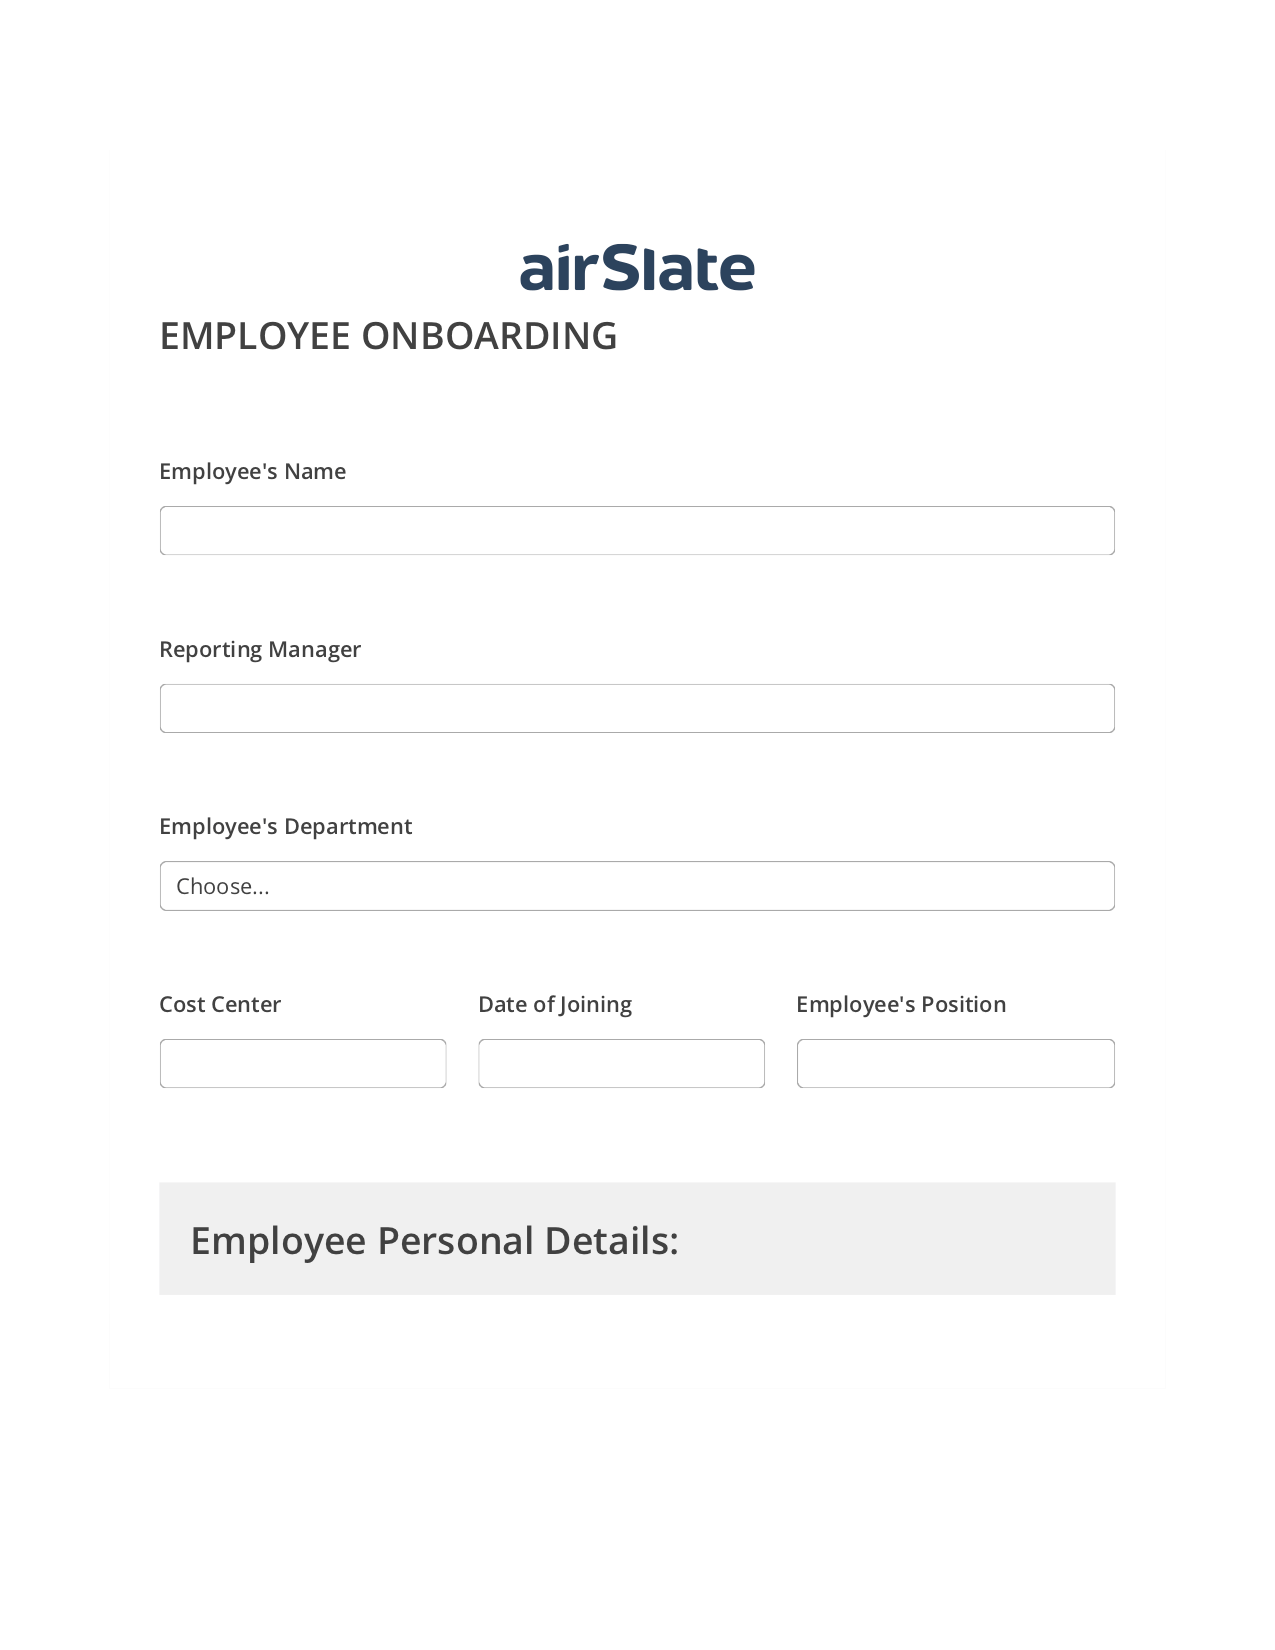 Multirole Employee Onboarding Workflow Pre-fill Slate from MS Dynamics 365 record, Email Notification Bot, Export to Excel 365 Bot